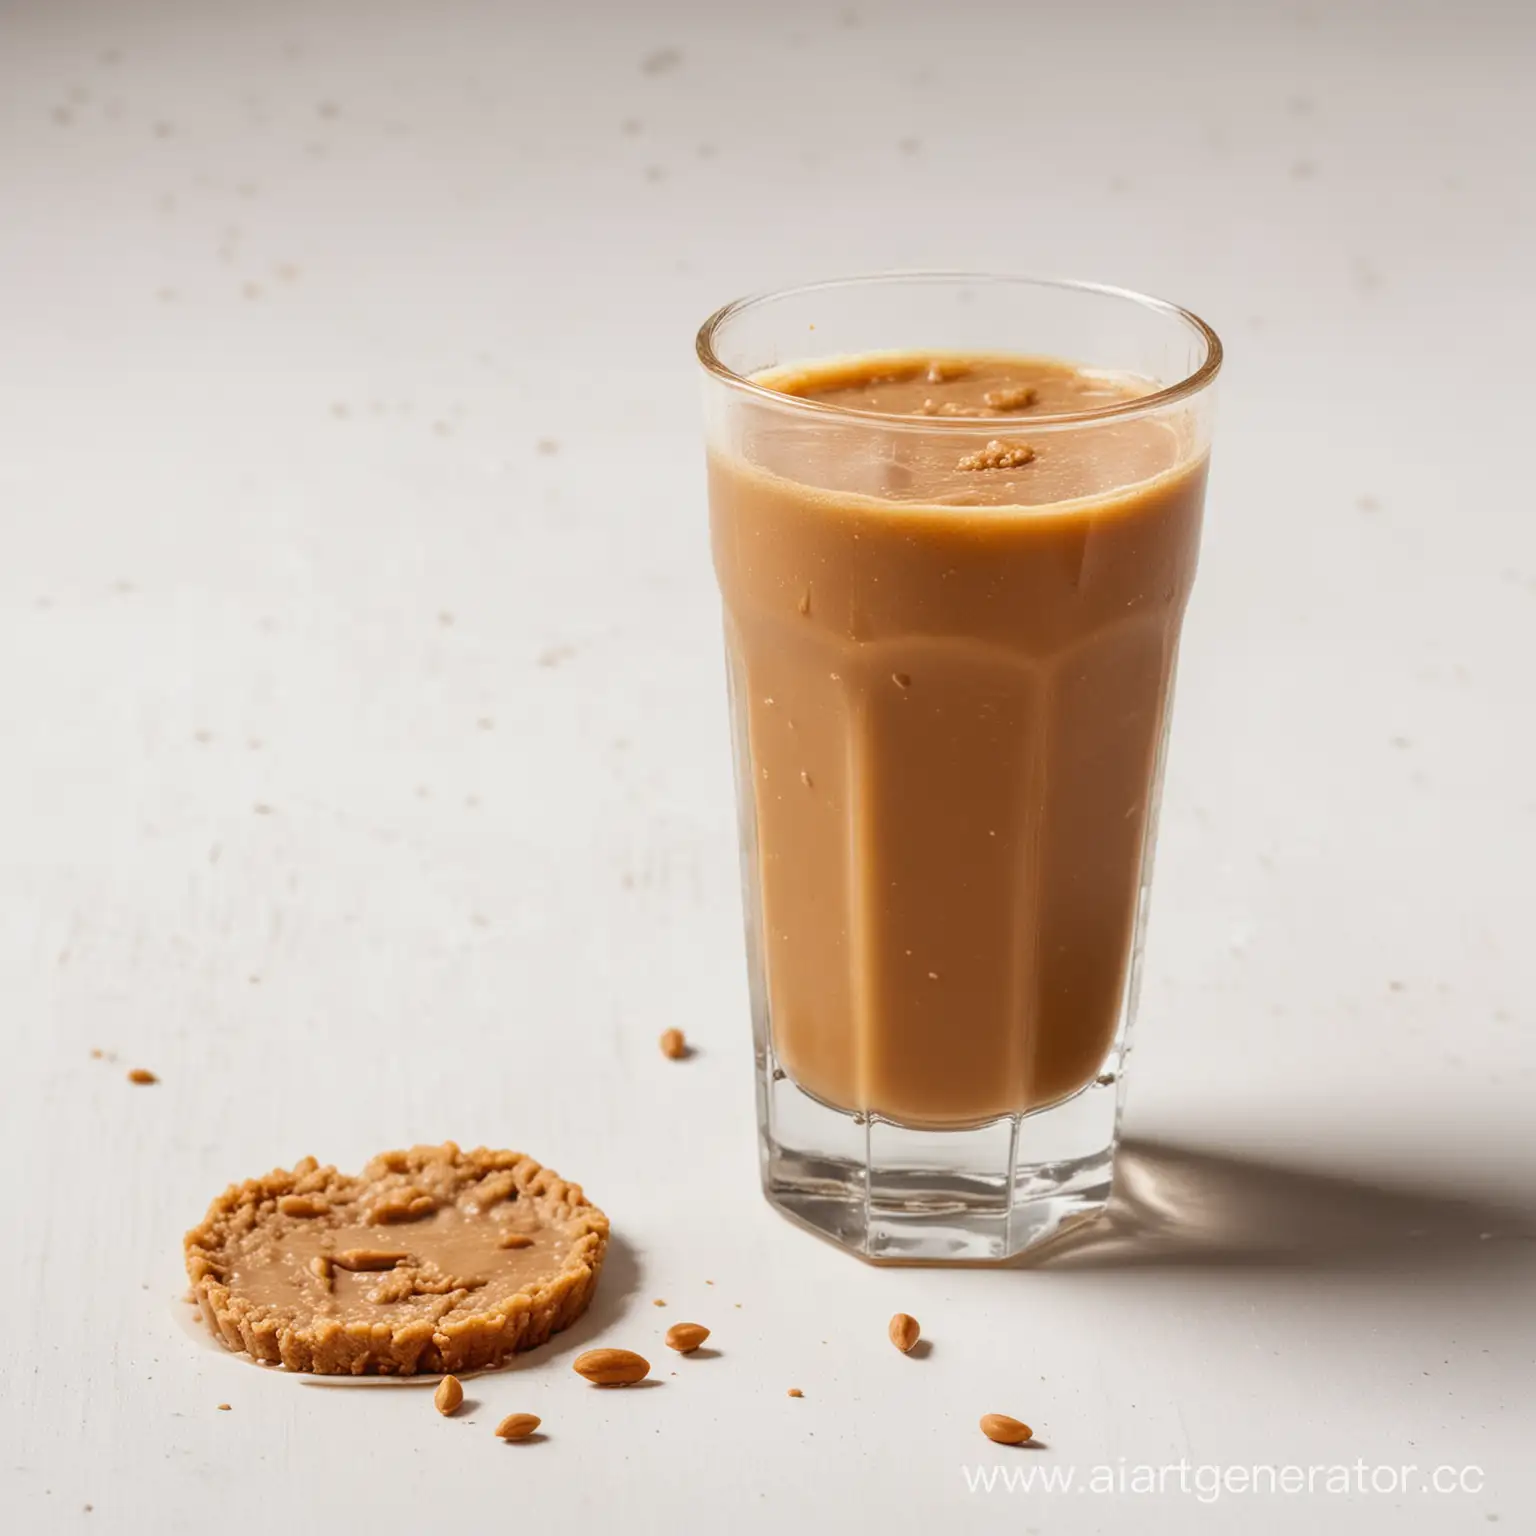 Refreshing-Peanut-Paste-Drink-in-Transparent-Glass-on-White-Background